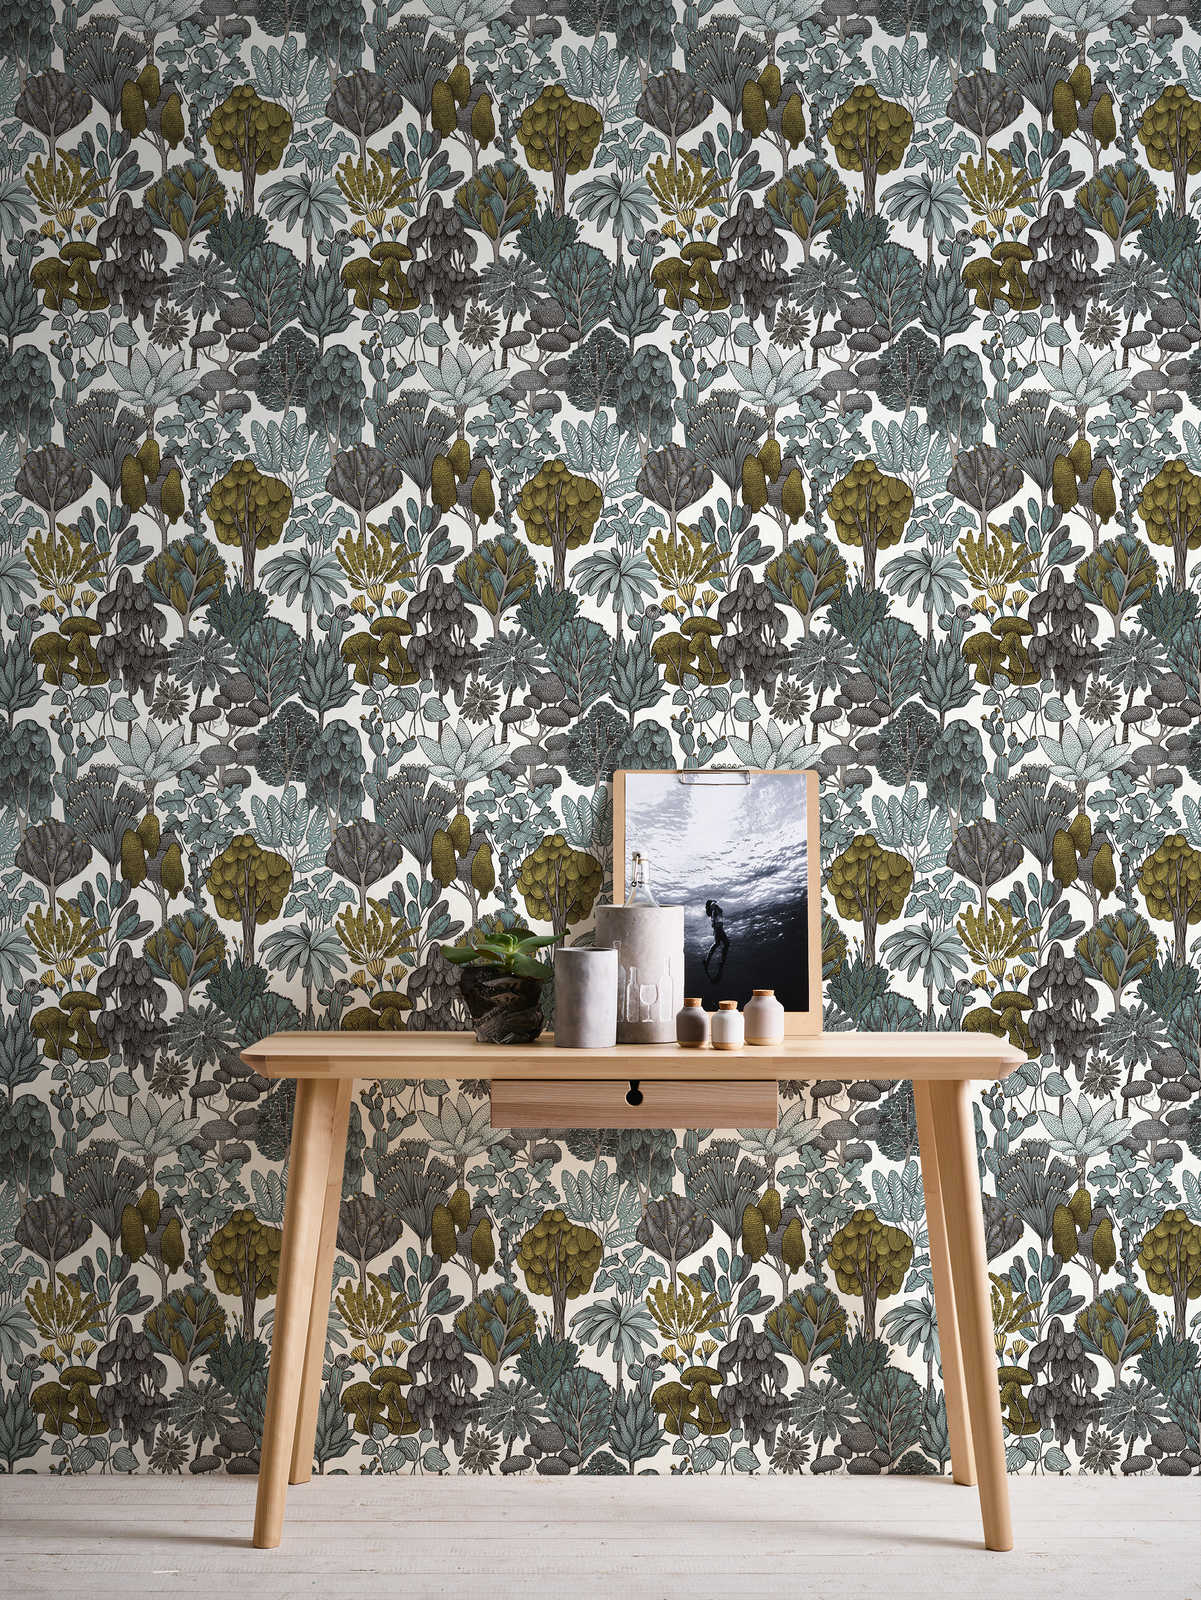             wallpaper green grey floral pattern in doodle style - green, grey, yellow
        